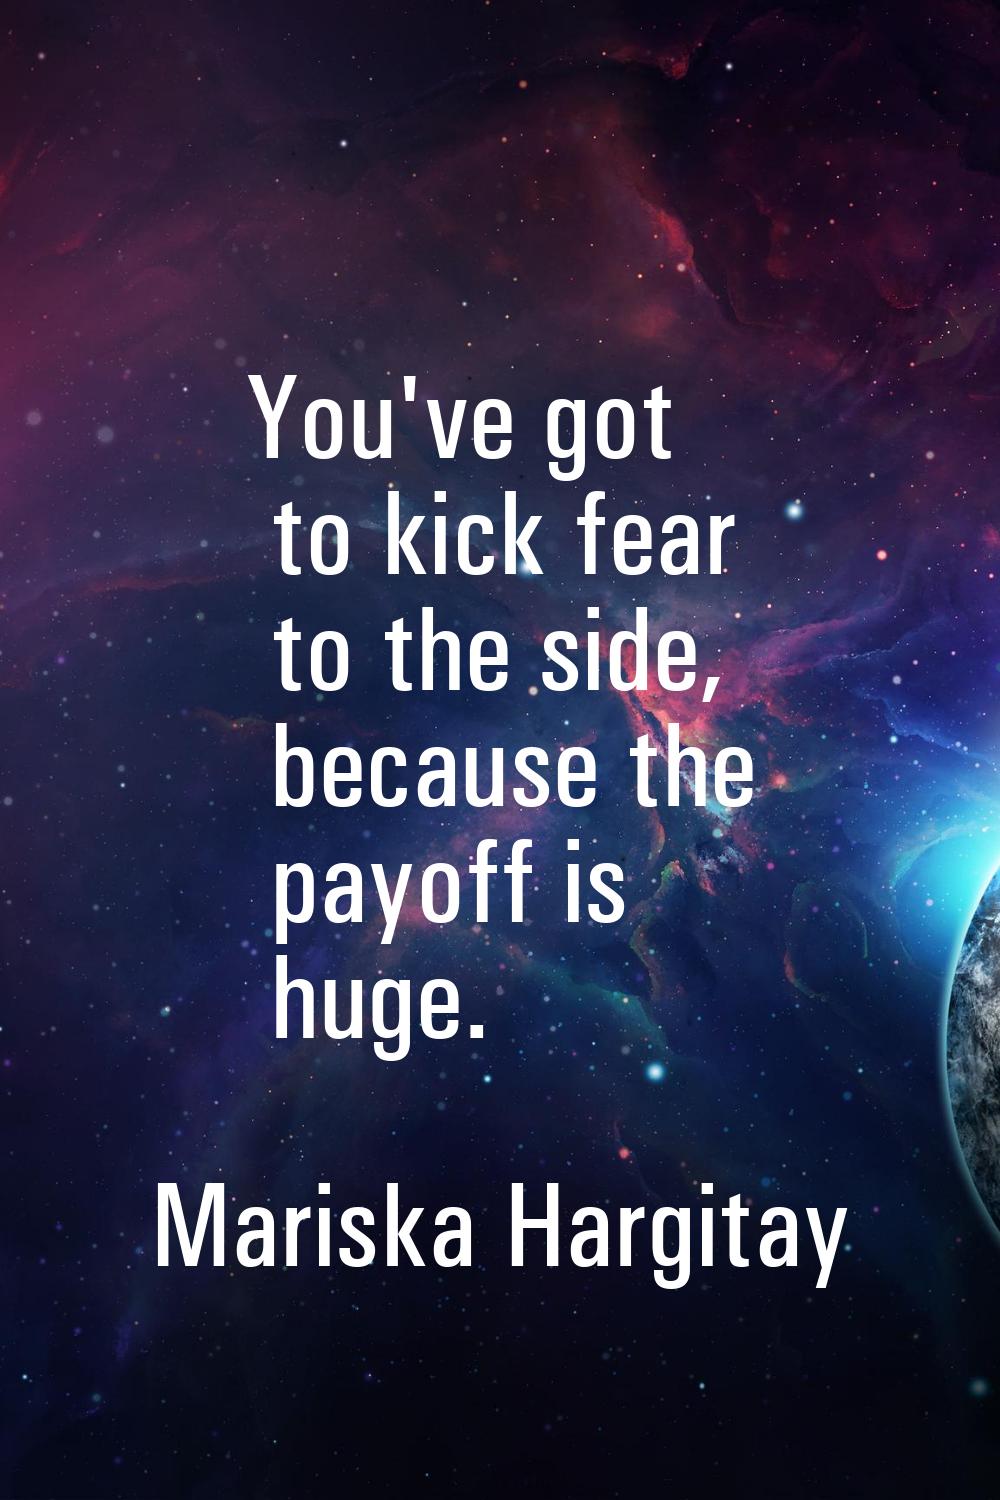 You've got to kick fear to the side, because the payoff is huge.